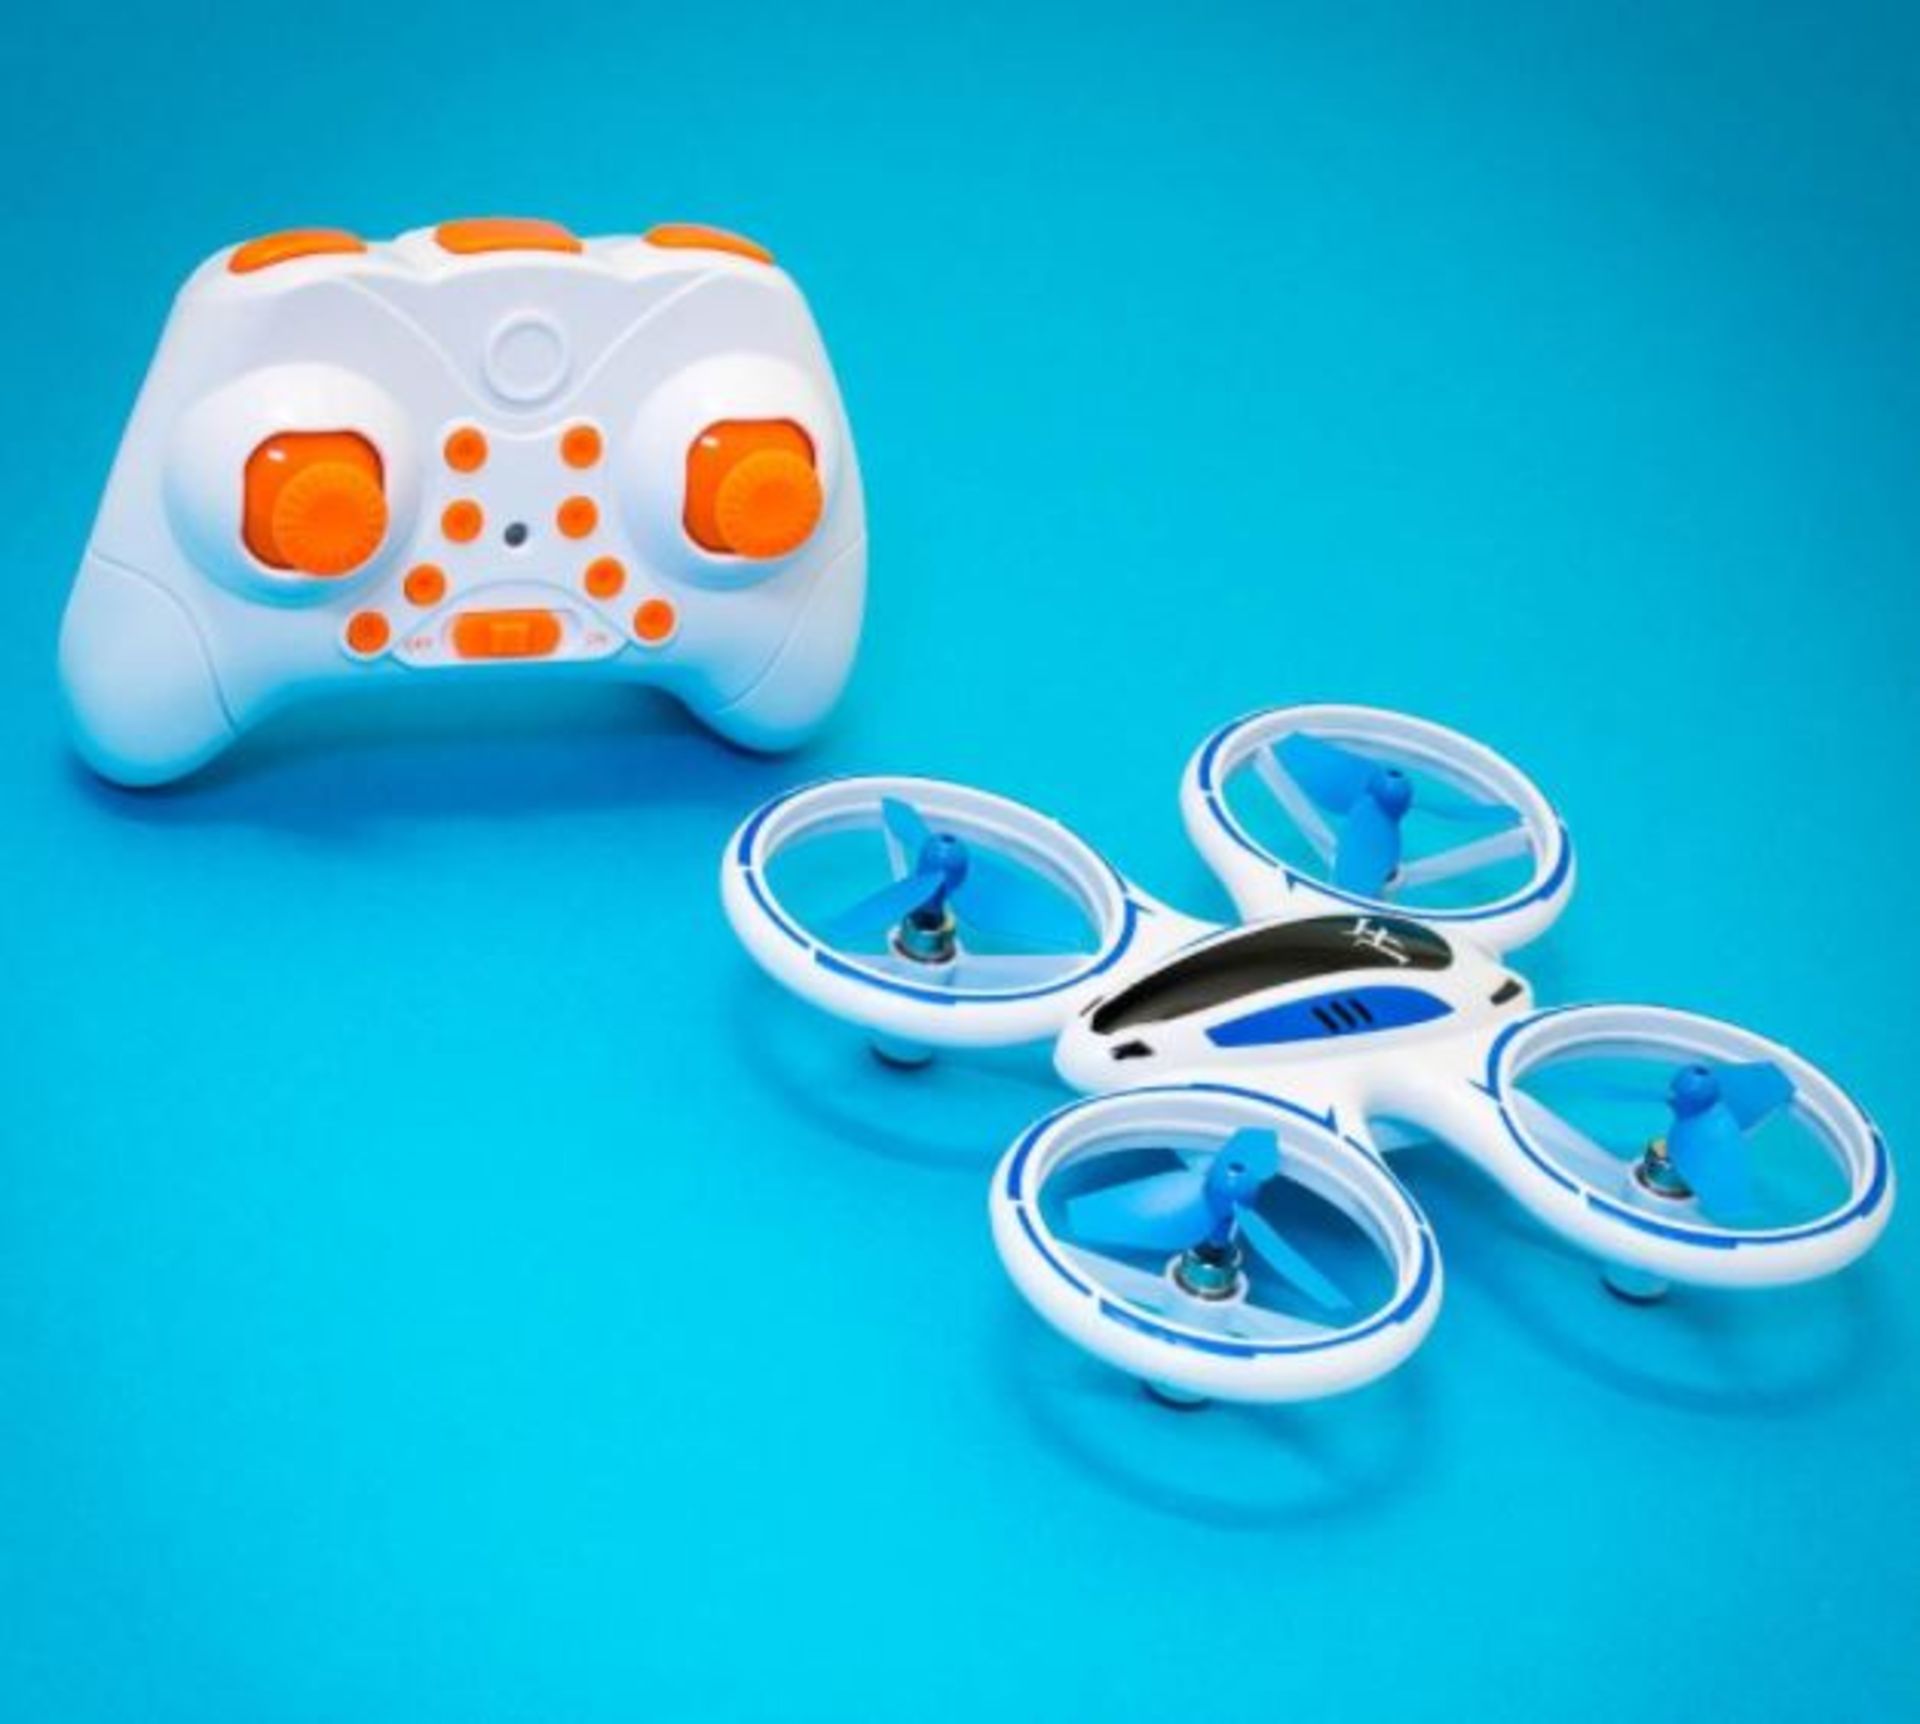 (R2N) 9x Red5 The Illuminator Light Up Drone. 2x Red5 Virtually Indestructible Drone